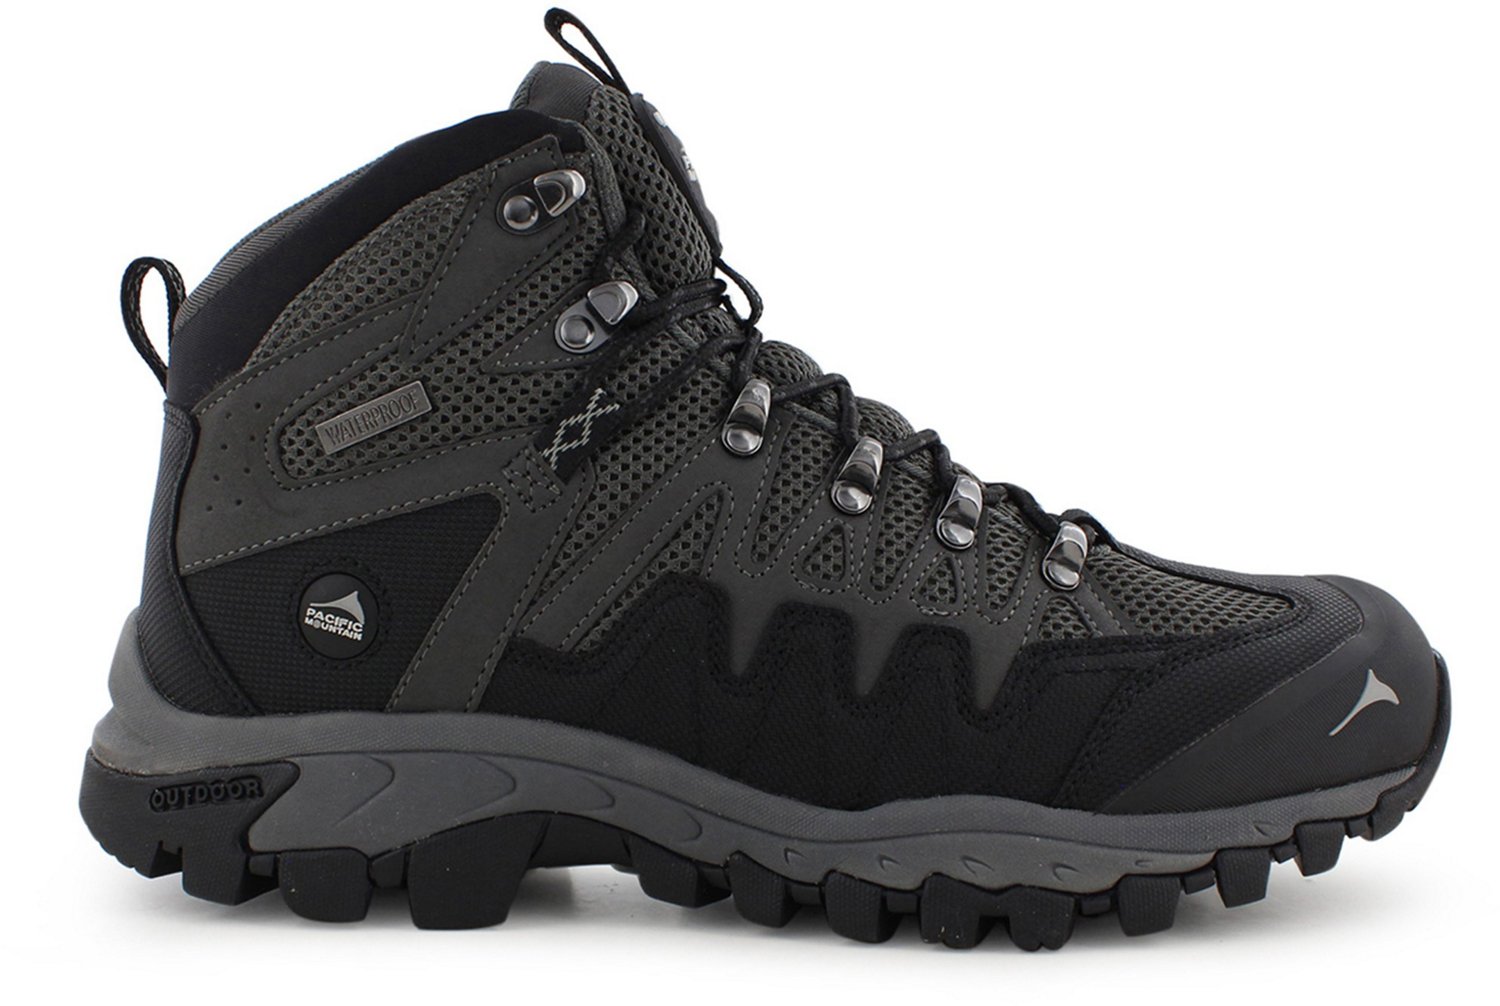 Pacific Mountain Mens Emmons Mid Waterproof Hiking Shoes